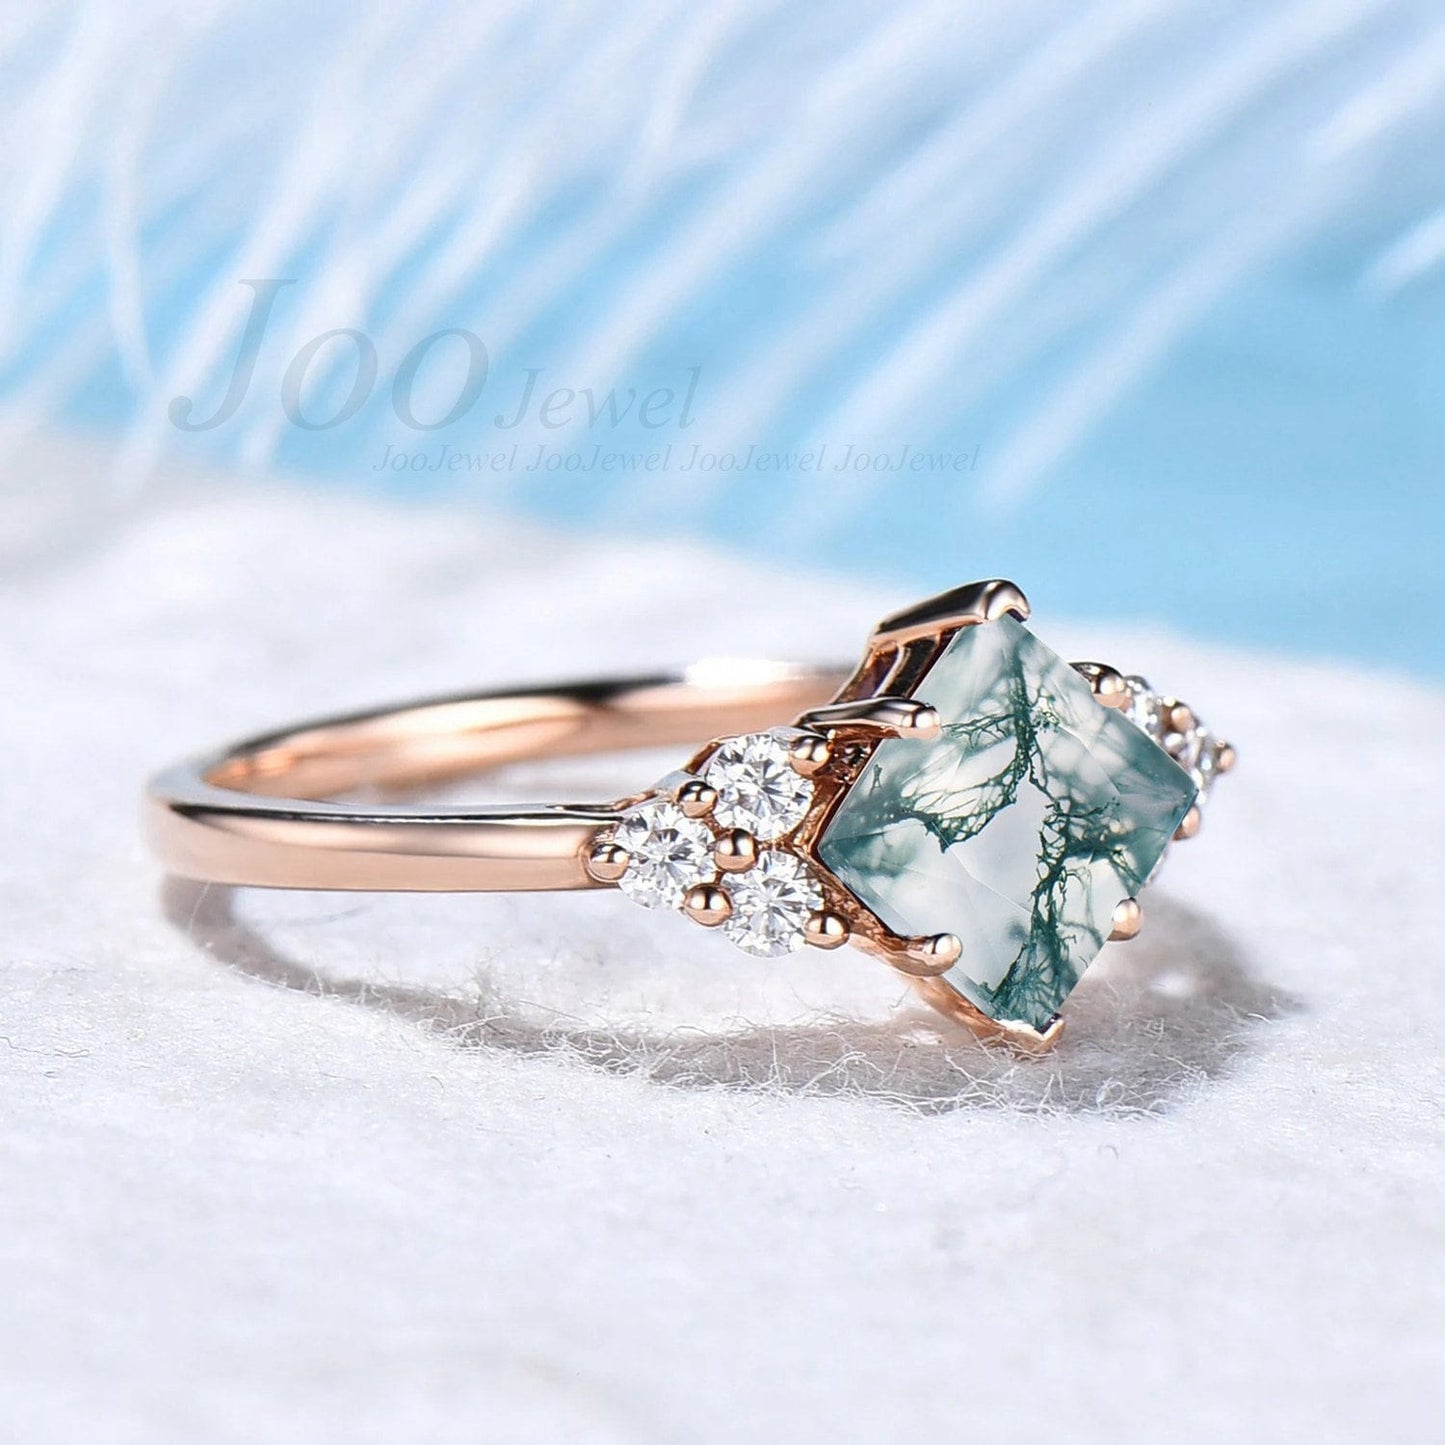 Princess Cut Natural Green Clear Moss Agate Ring 14K Gold Square Moss Agate 6 Prong Fixed Engagement Ring For Women Crystal Jewelry Gift